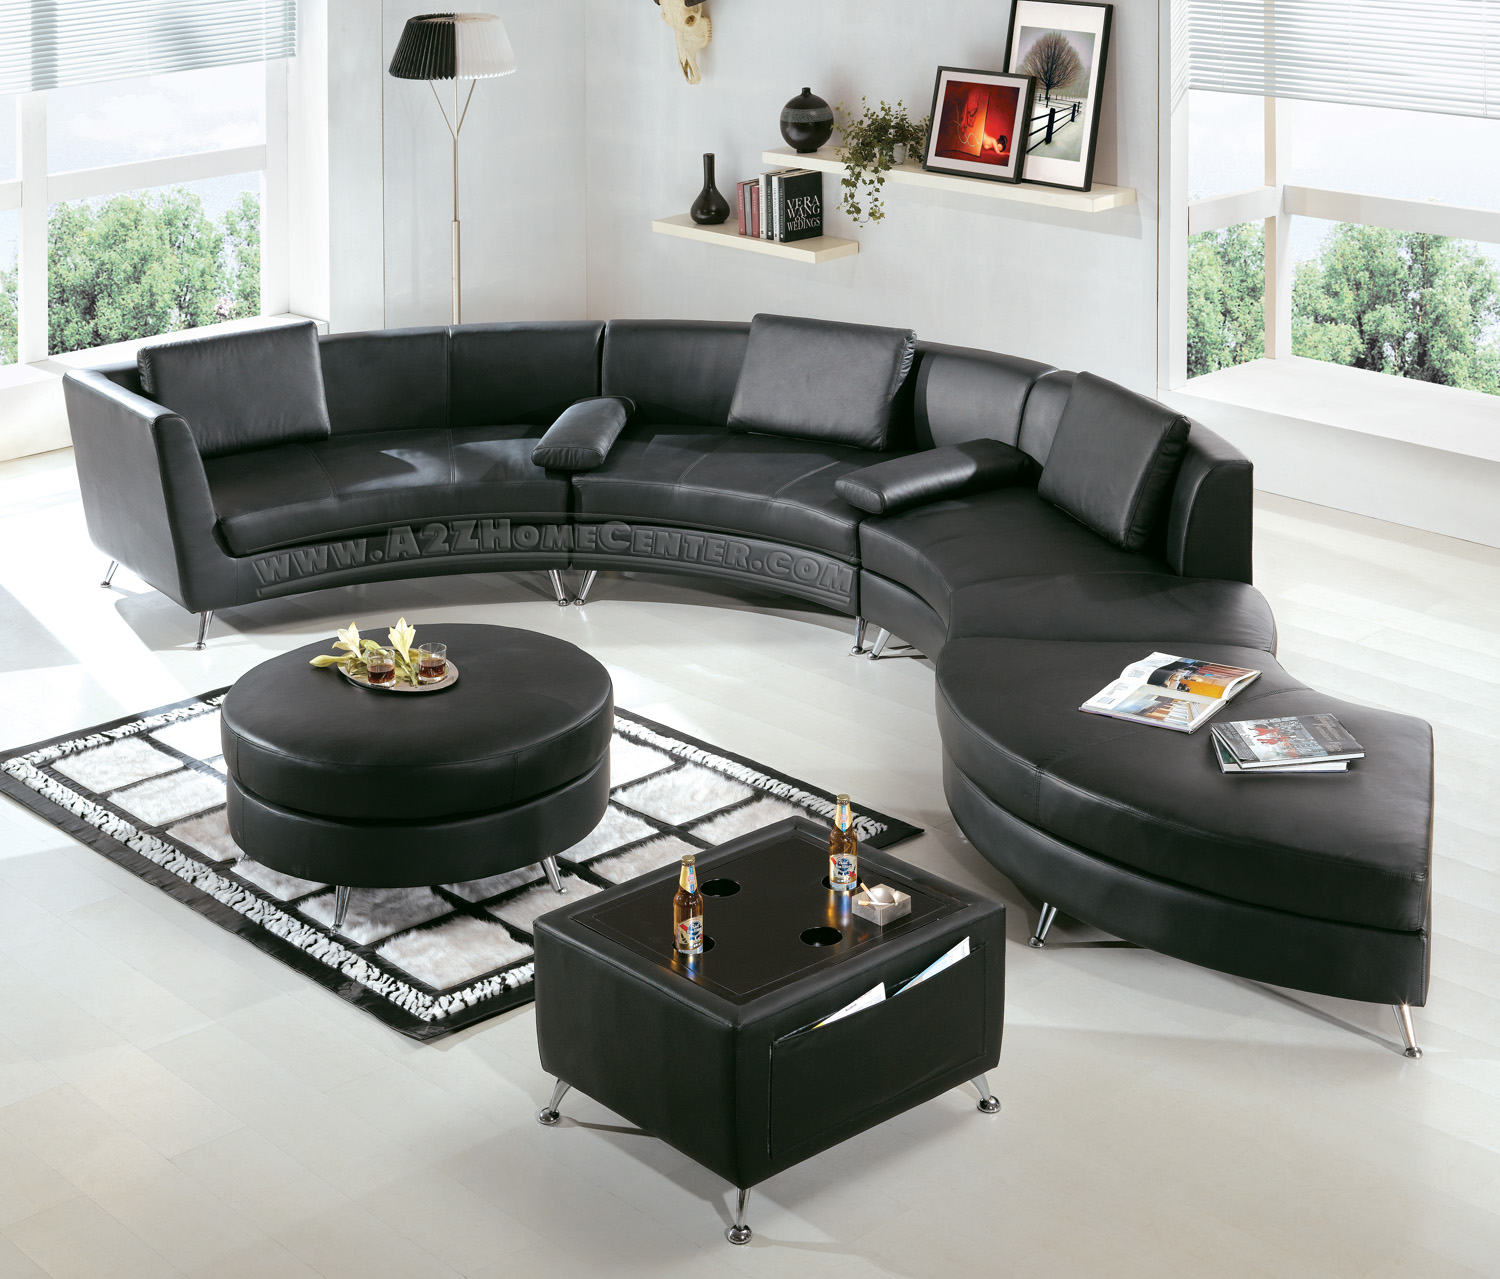 Set Your Living Space With Modern Furnishings Products unique furniture designs for sale